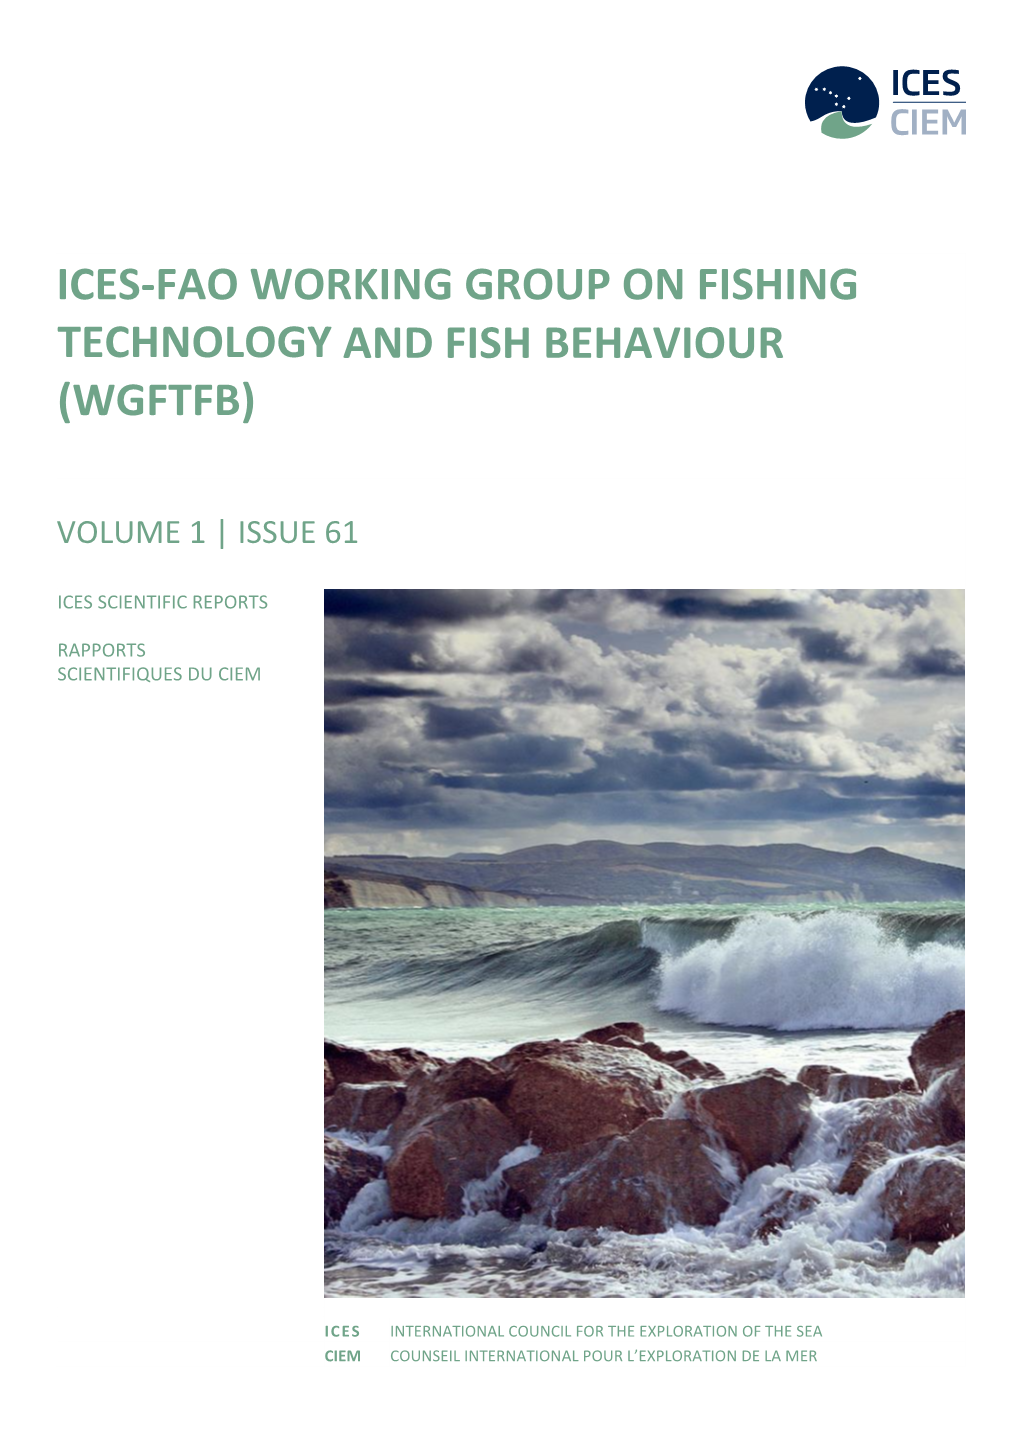 Ices-Fao Working Group on Fishing Technology and Fish Behaviour (Wgftfb)